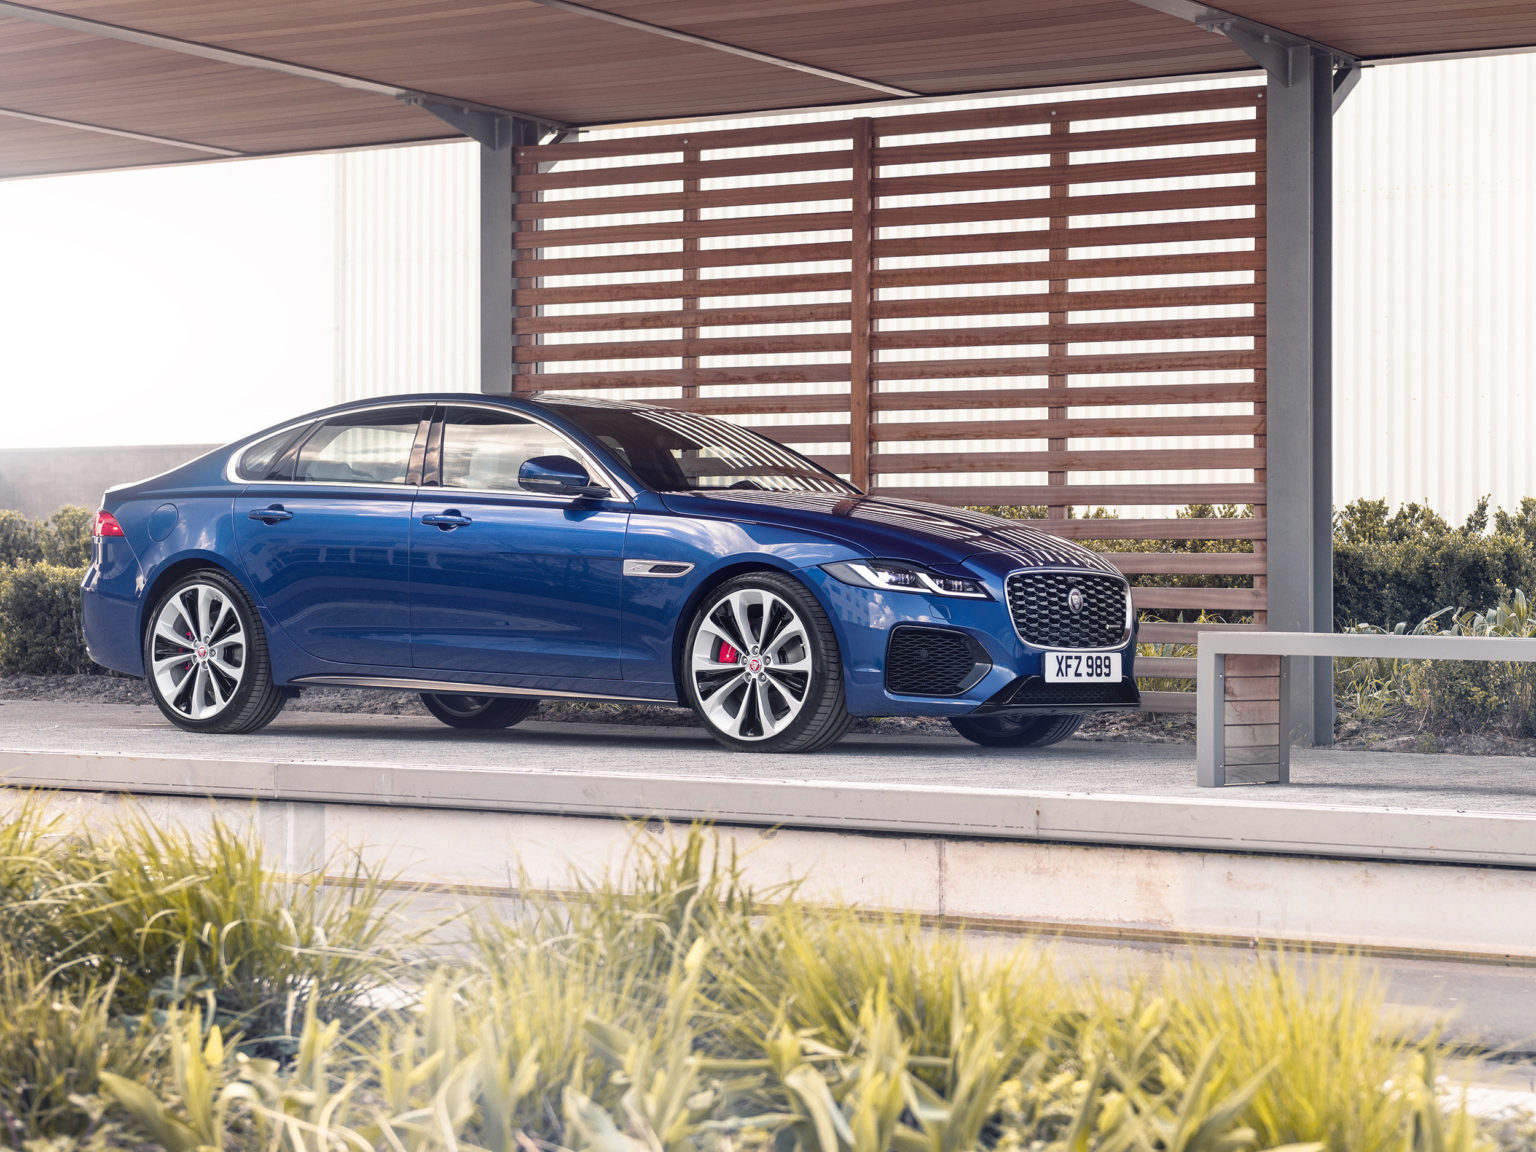 The Jaguar XF has been thoroughly redesigned for the 2021 model year.